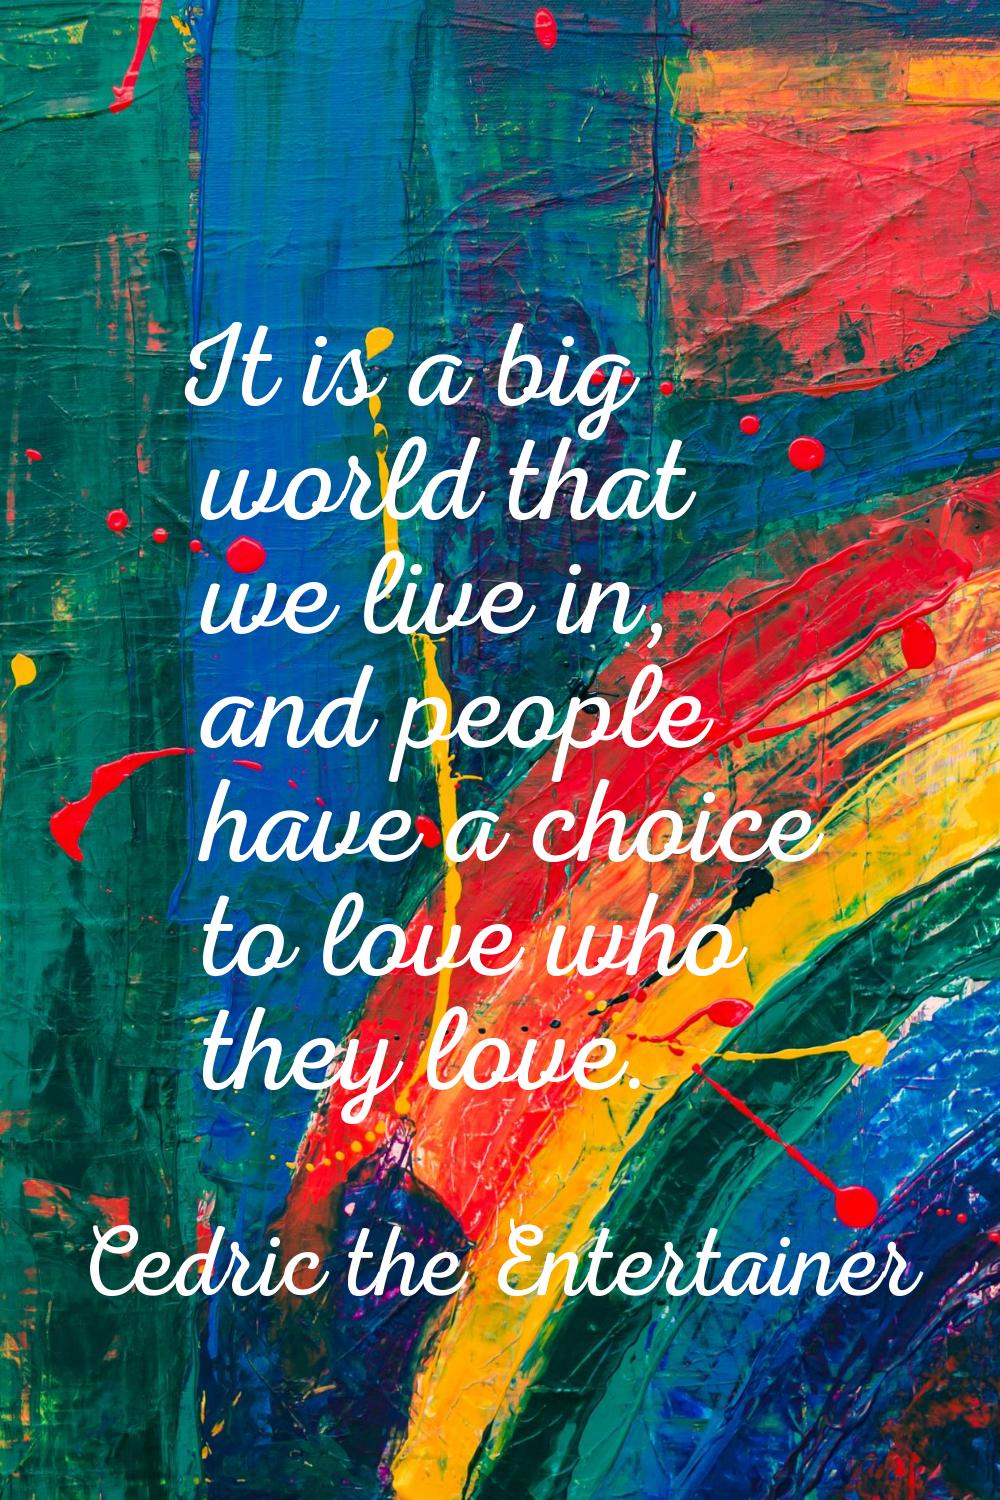 It is a big world that we live in, and people have a choice to love who they love.